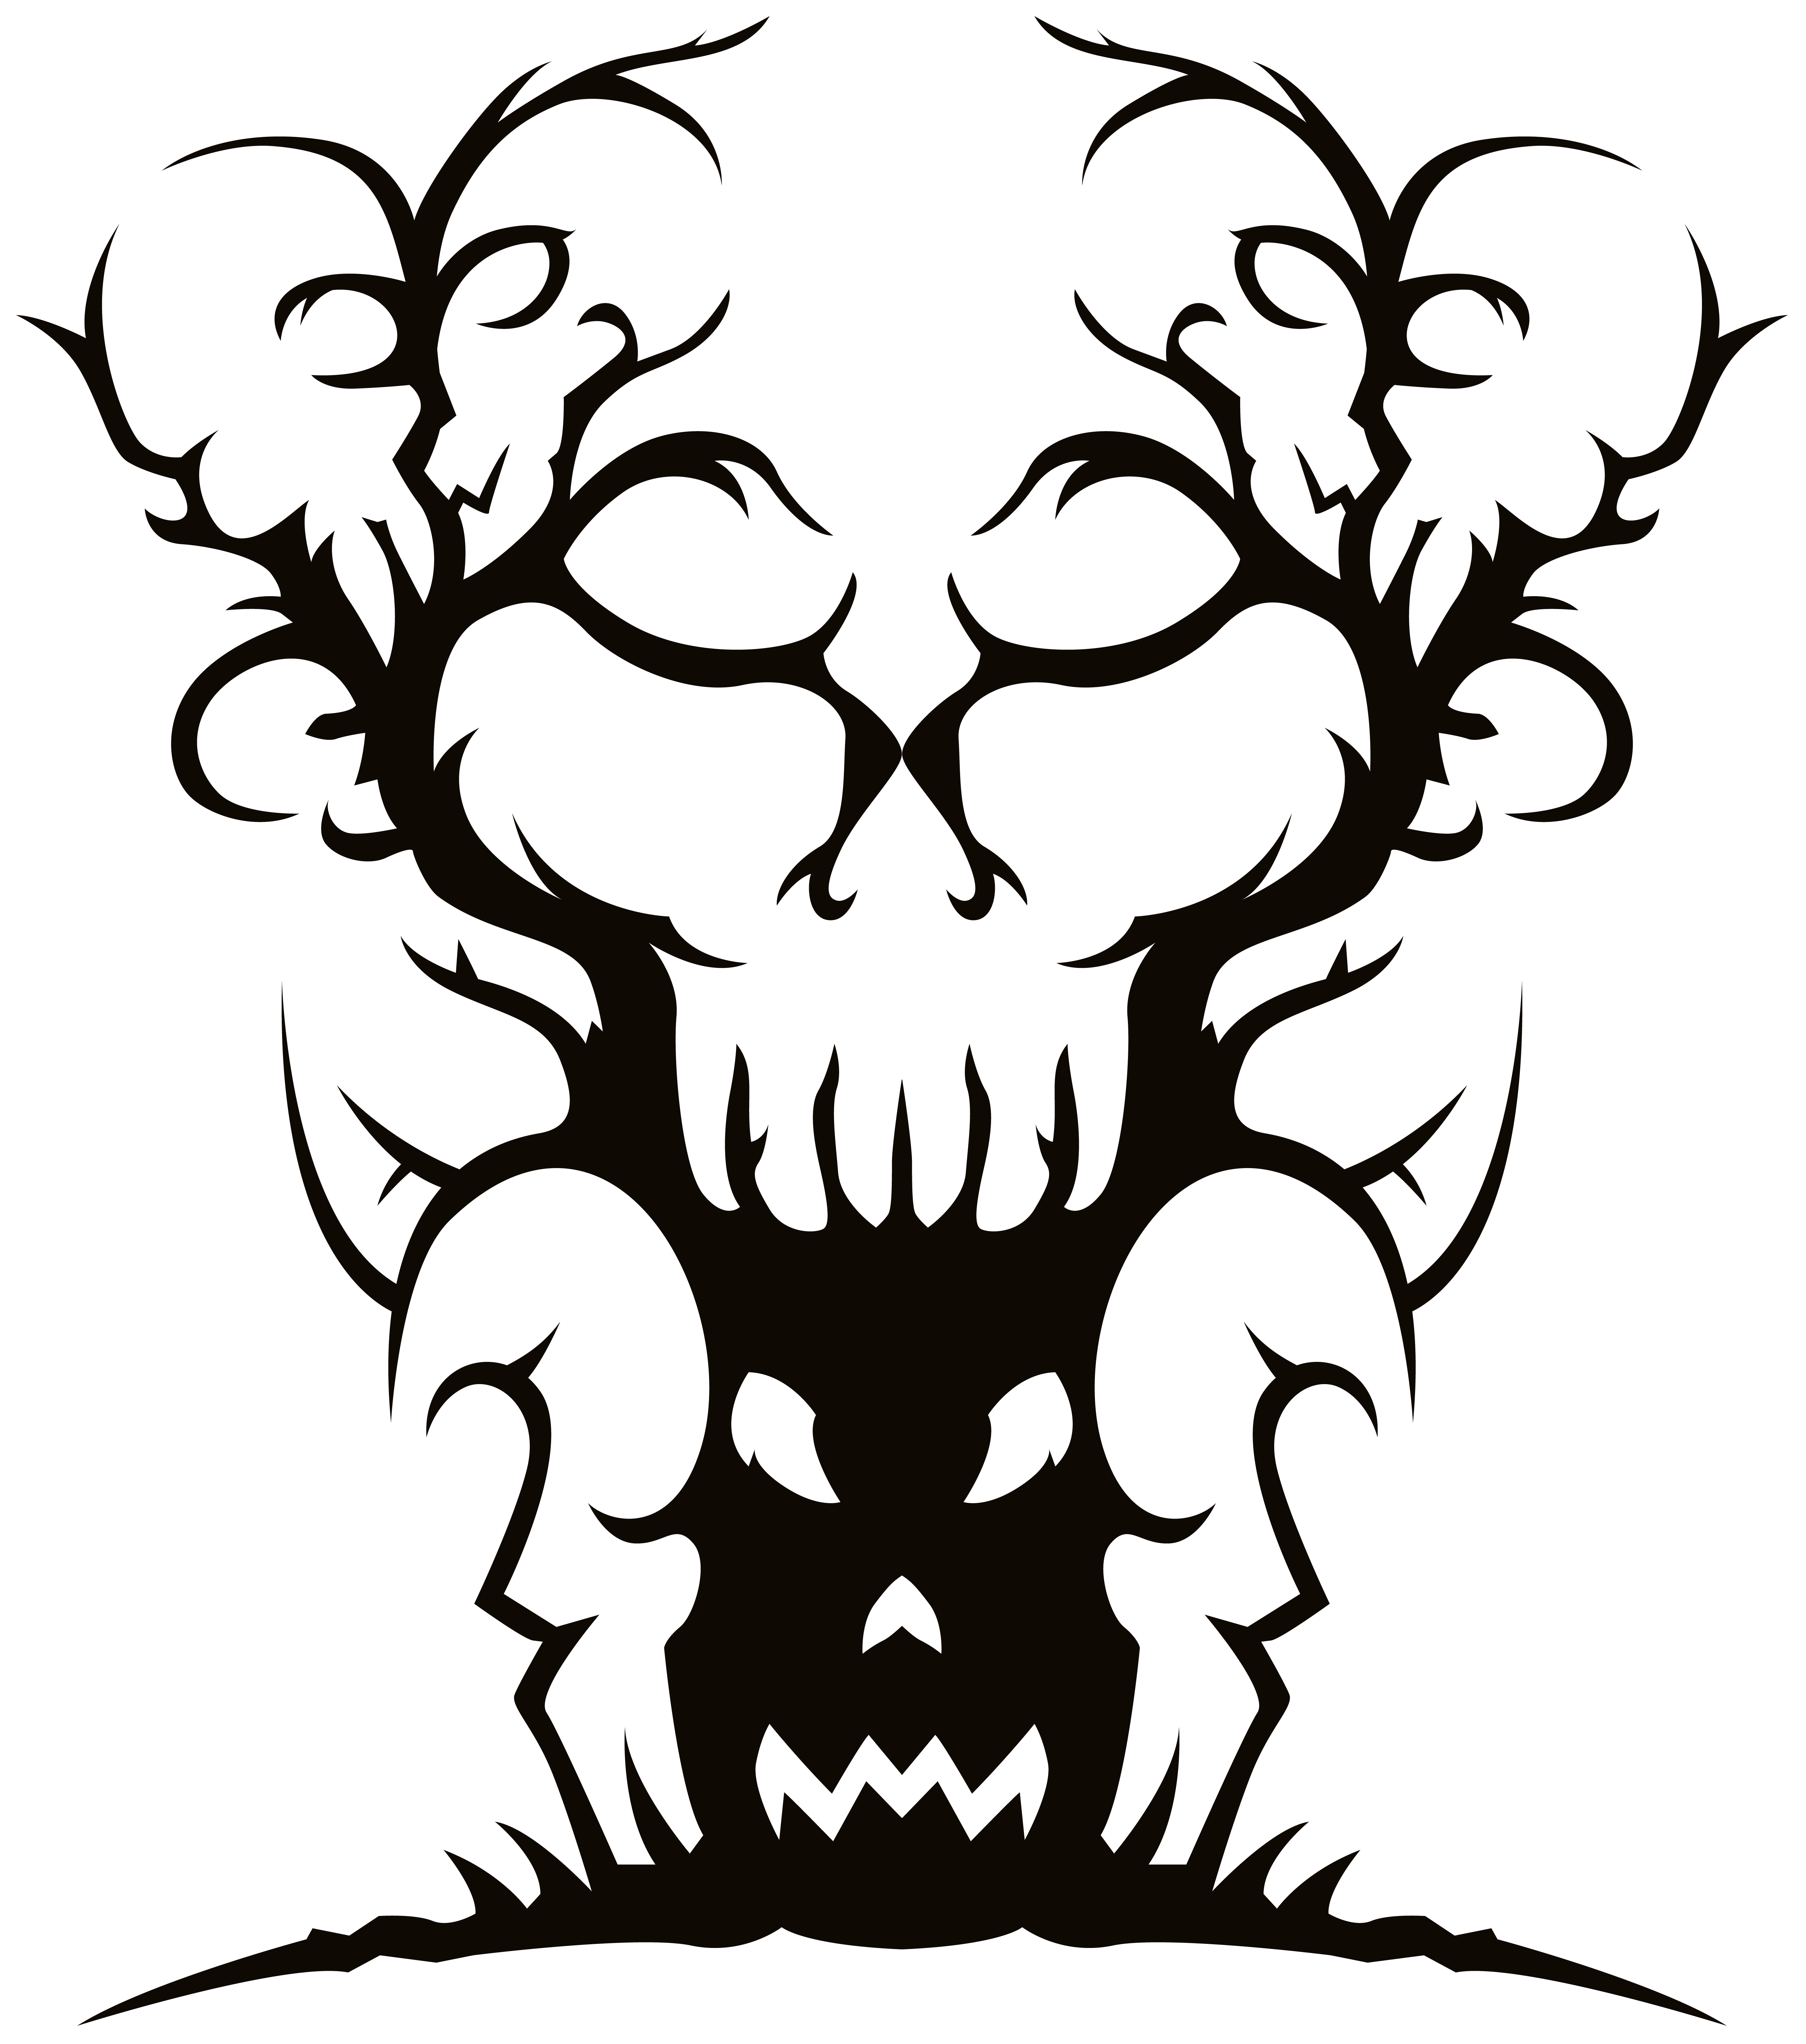 Grave clipart horror. Scary spooky tree png